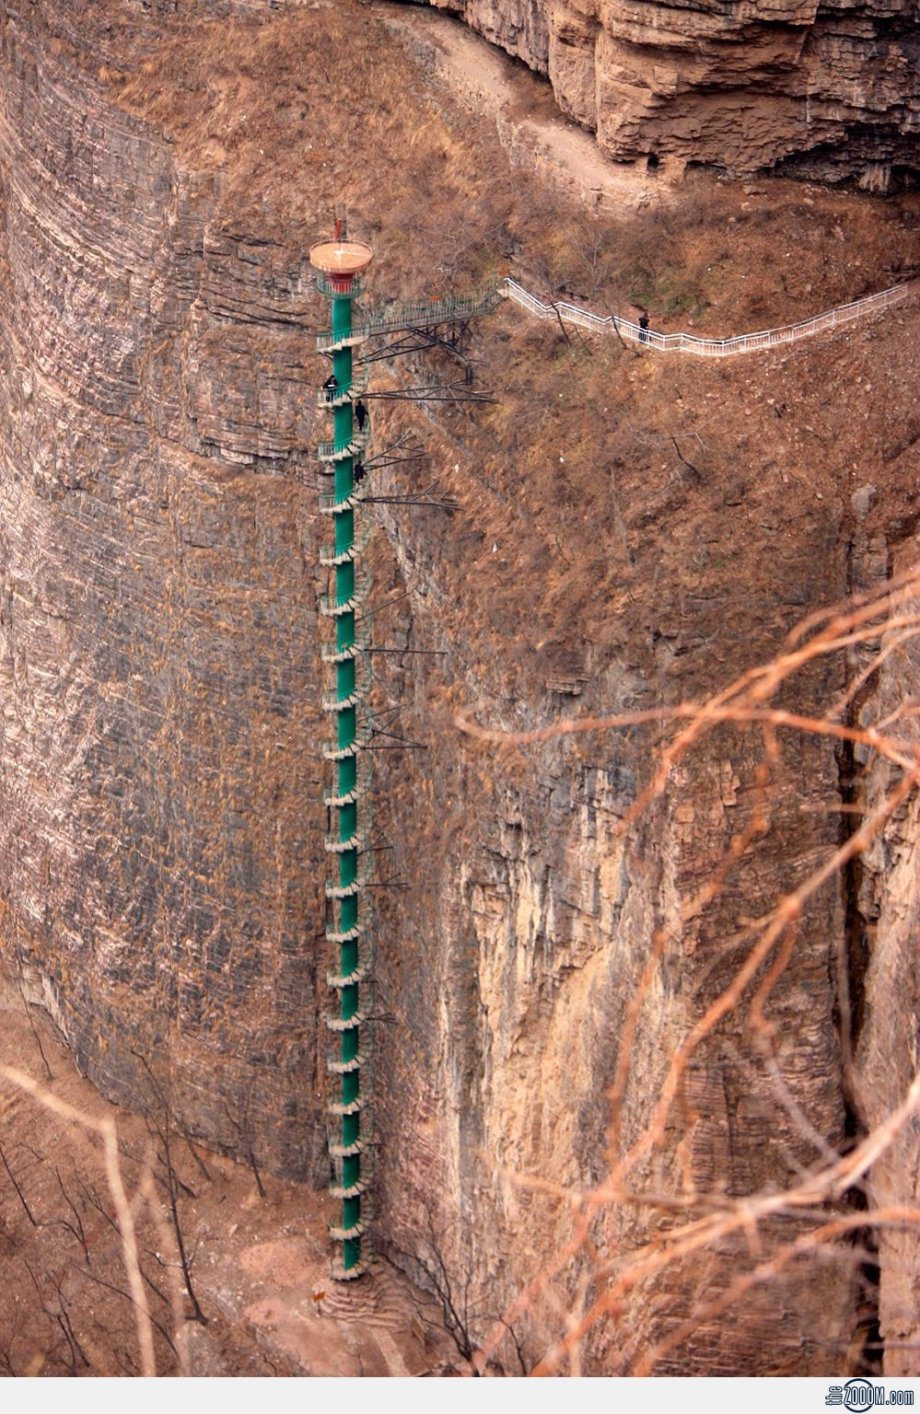 piral Staircase in Taihang Mountains - 중국.jpg